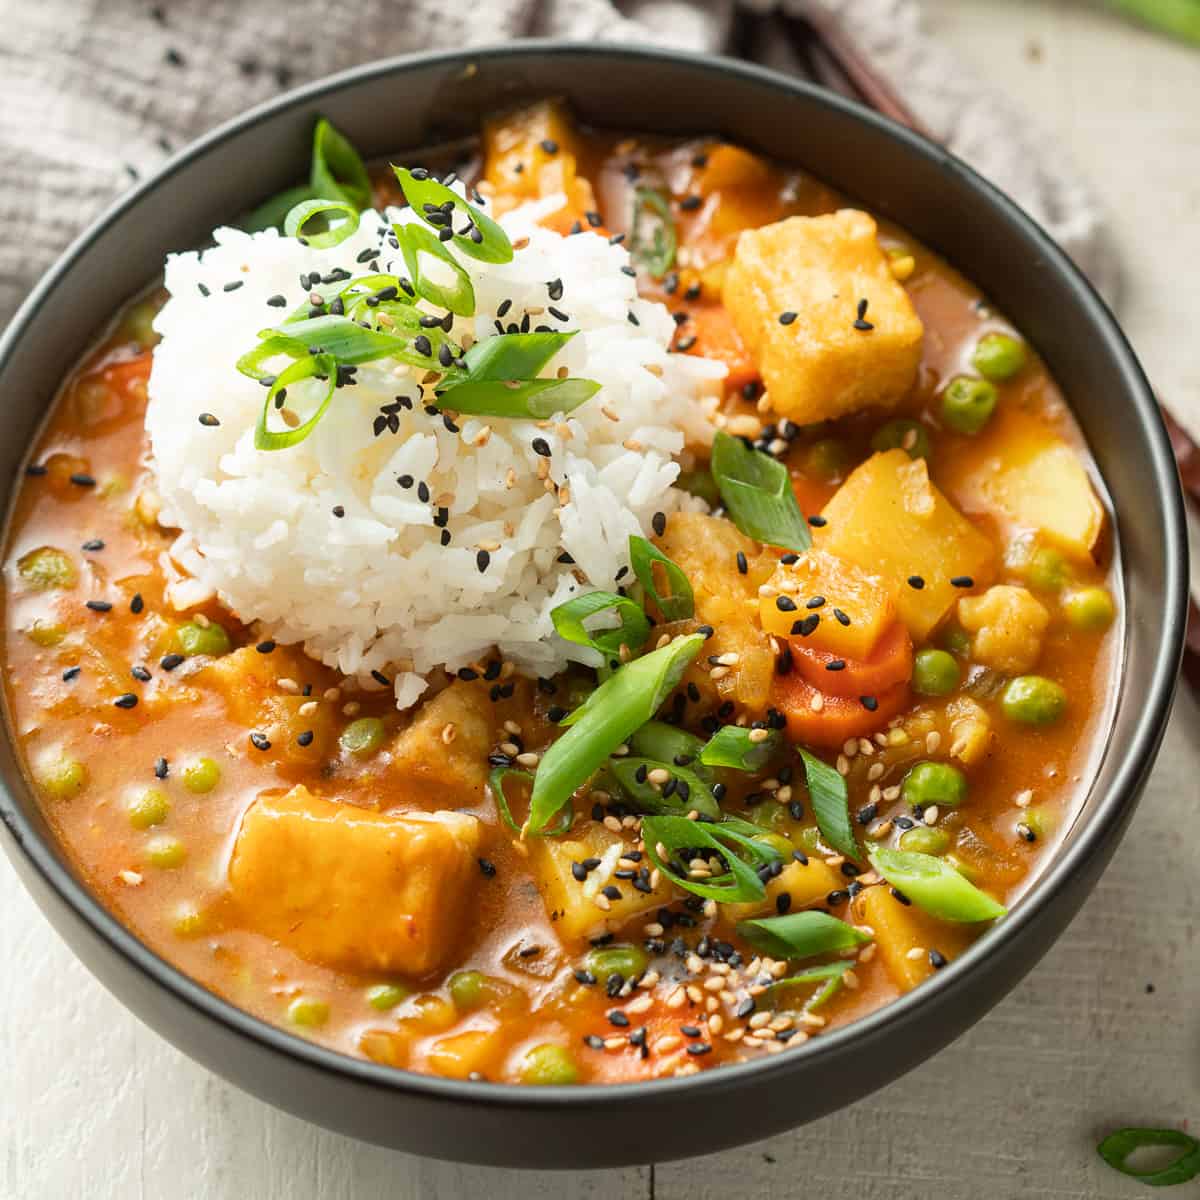 Bowl of Vegan Japanese Curry with rice, scallions and sesame seeds.